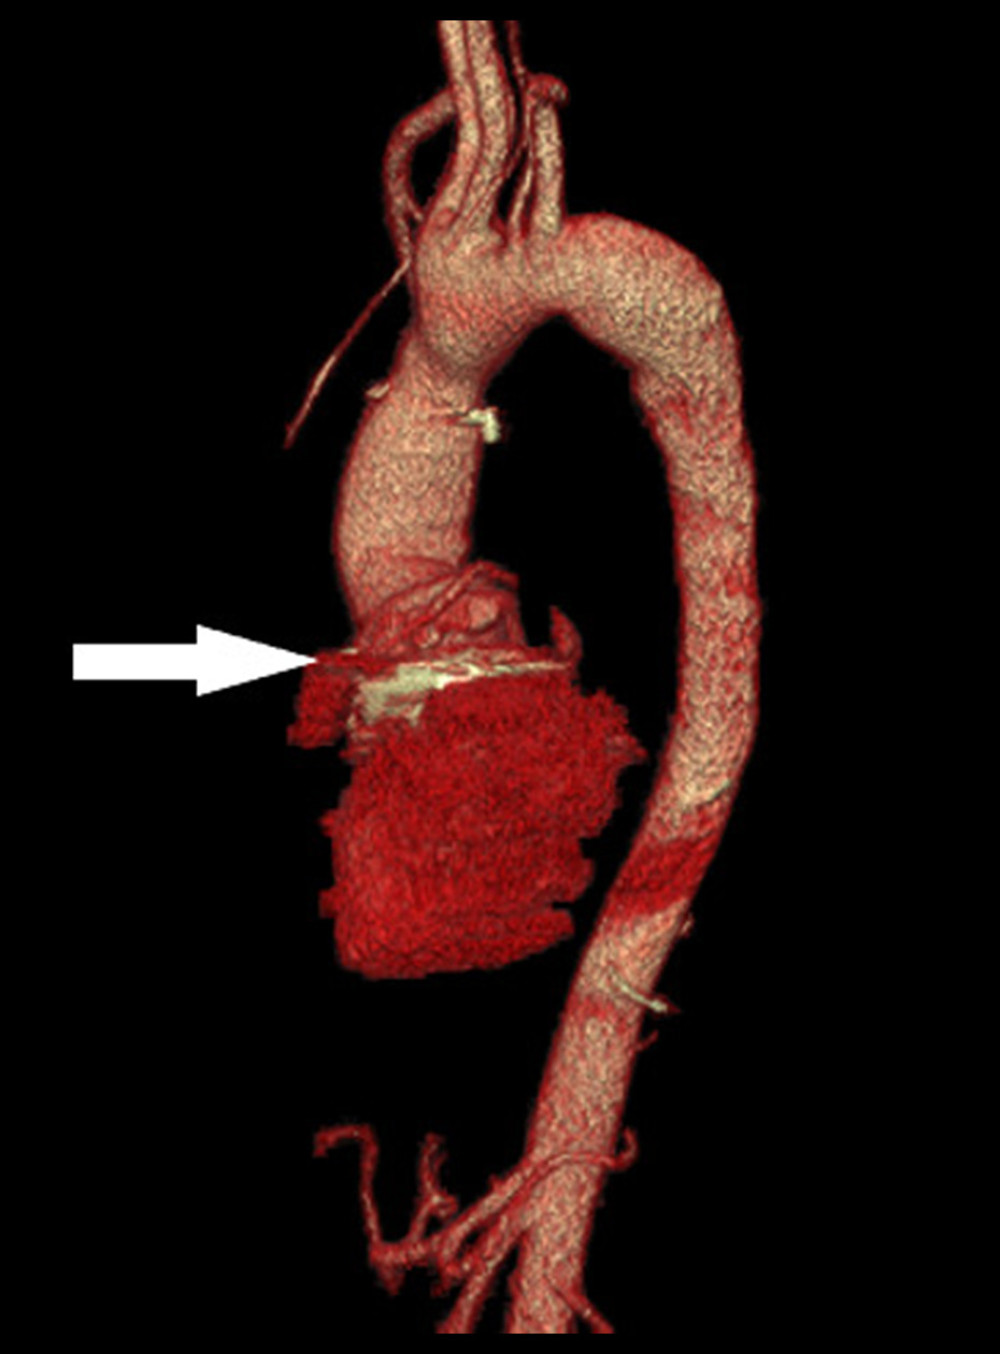 Volume-rendering technique of computed tomography showing previous Bentall’s valve-graft prosthesis (arrow), and the entire aorta.